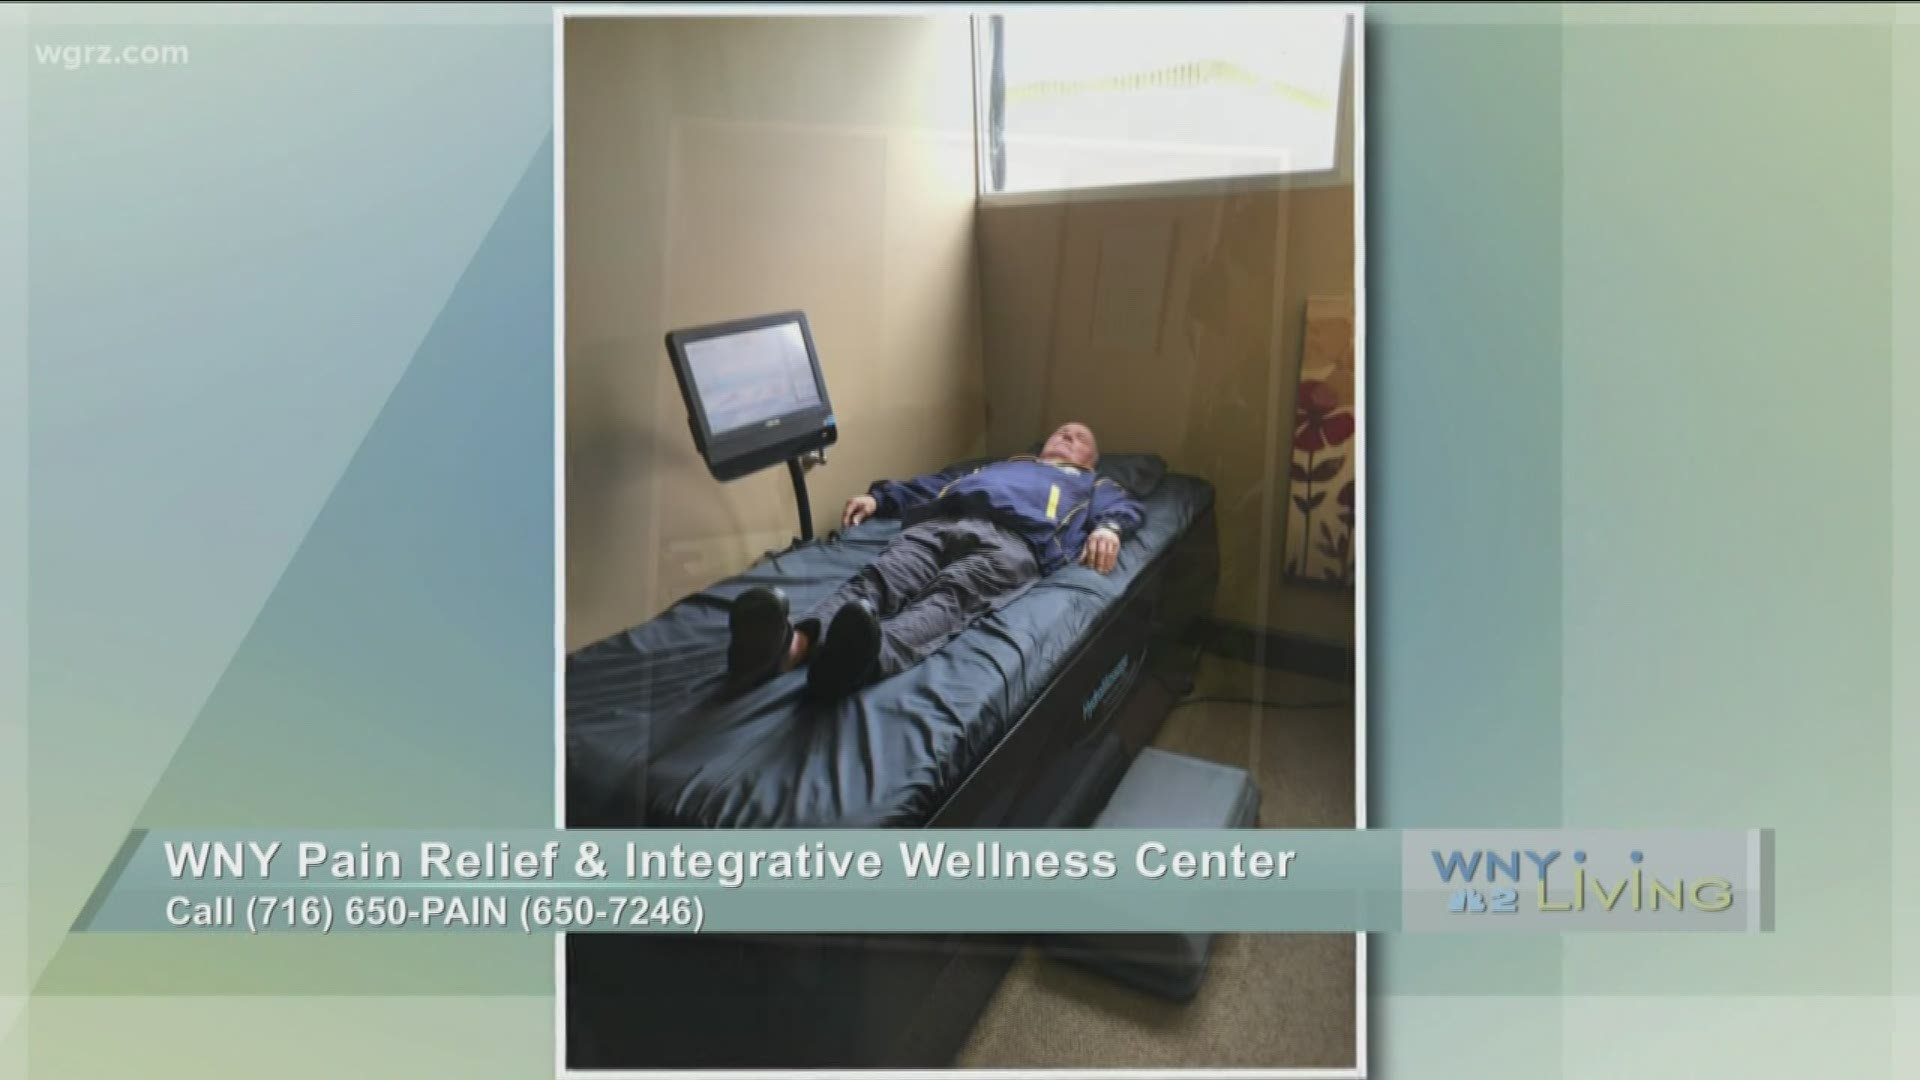 March 7 - WECK WNY Pain Relief (THIS VIDEO IS SPONSORED BY WECK WNY PAIN RELIEF)